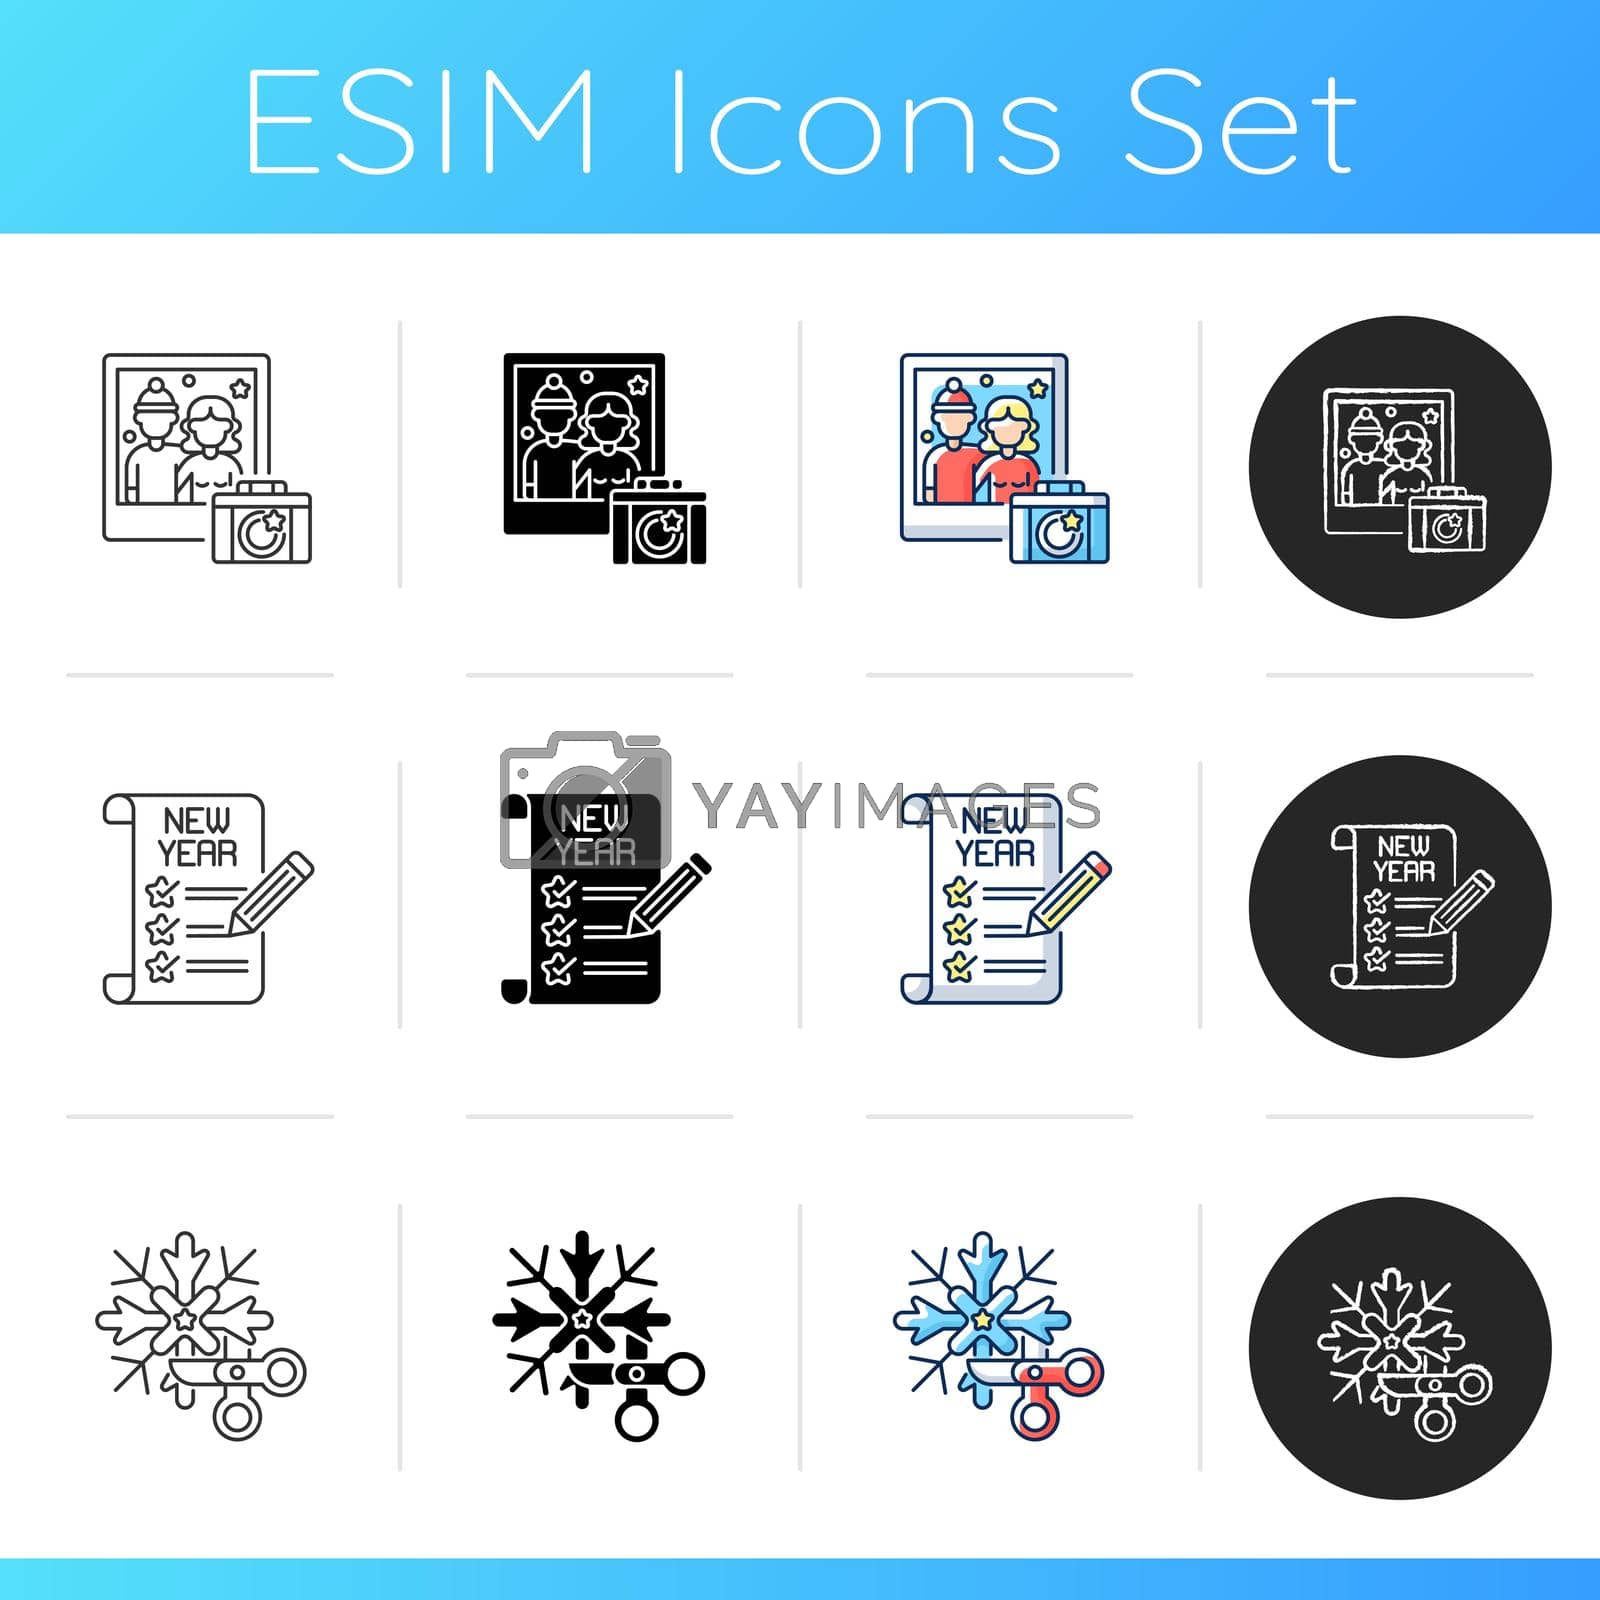 New Year celebration icons set. Family winter photography. Annual resolution. DIY snowflake. Handmade ornate decoration. Linear, black and RGB color styles. Isolated vector illustrations